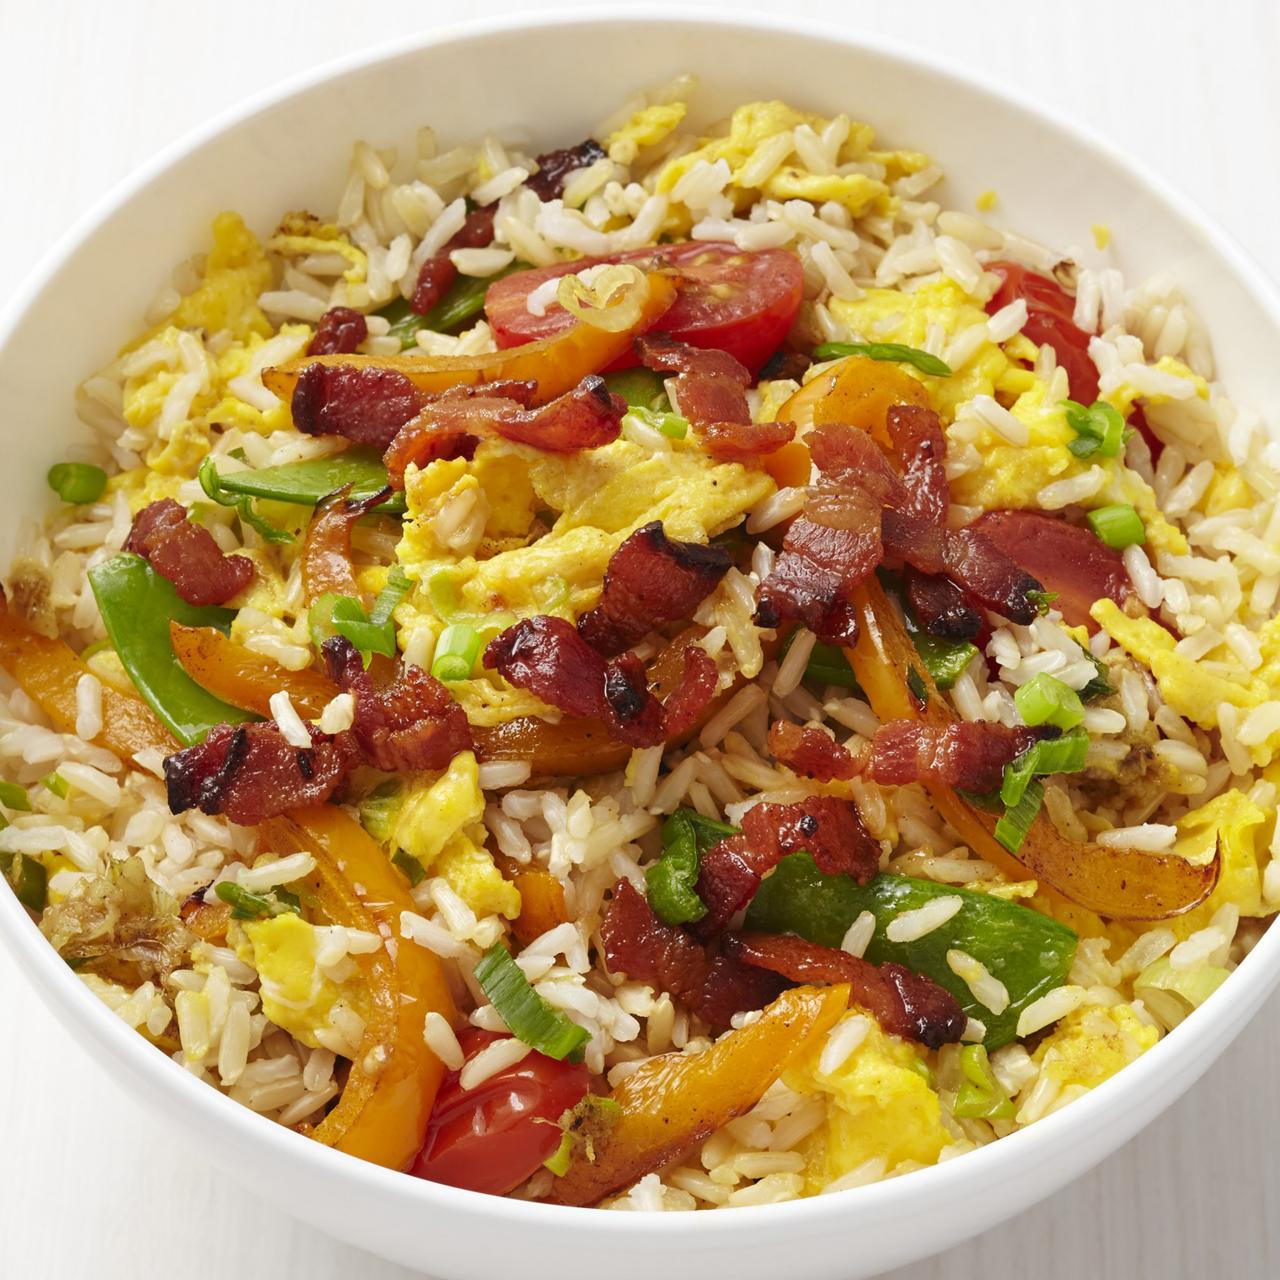 https://food.fnr.sndimg.com/content/dam/images/food/fullset/2015/1/15/1/FNM_030115-Fried-Rice-with-Bacon-Recipe_s4x3.jpg.rend.hgtvcom.1280.1280.suffix/1421795987132.jpeg